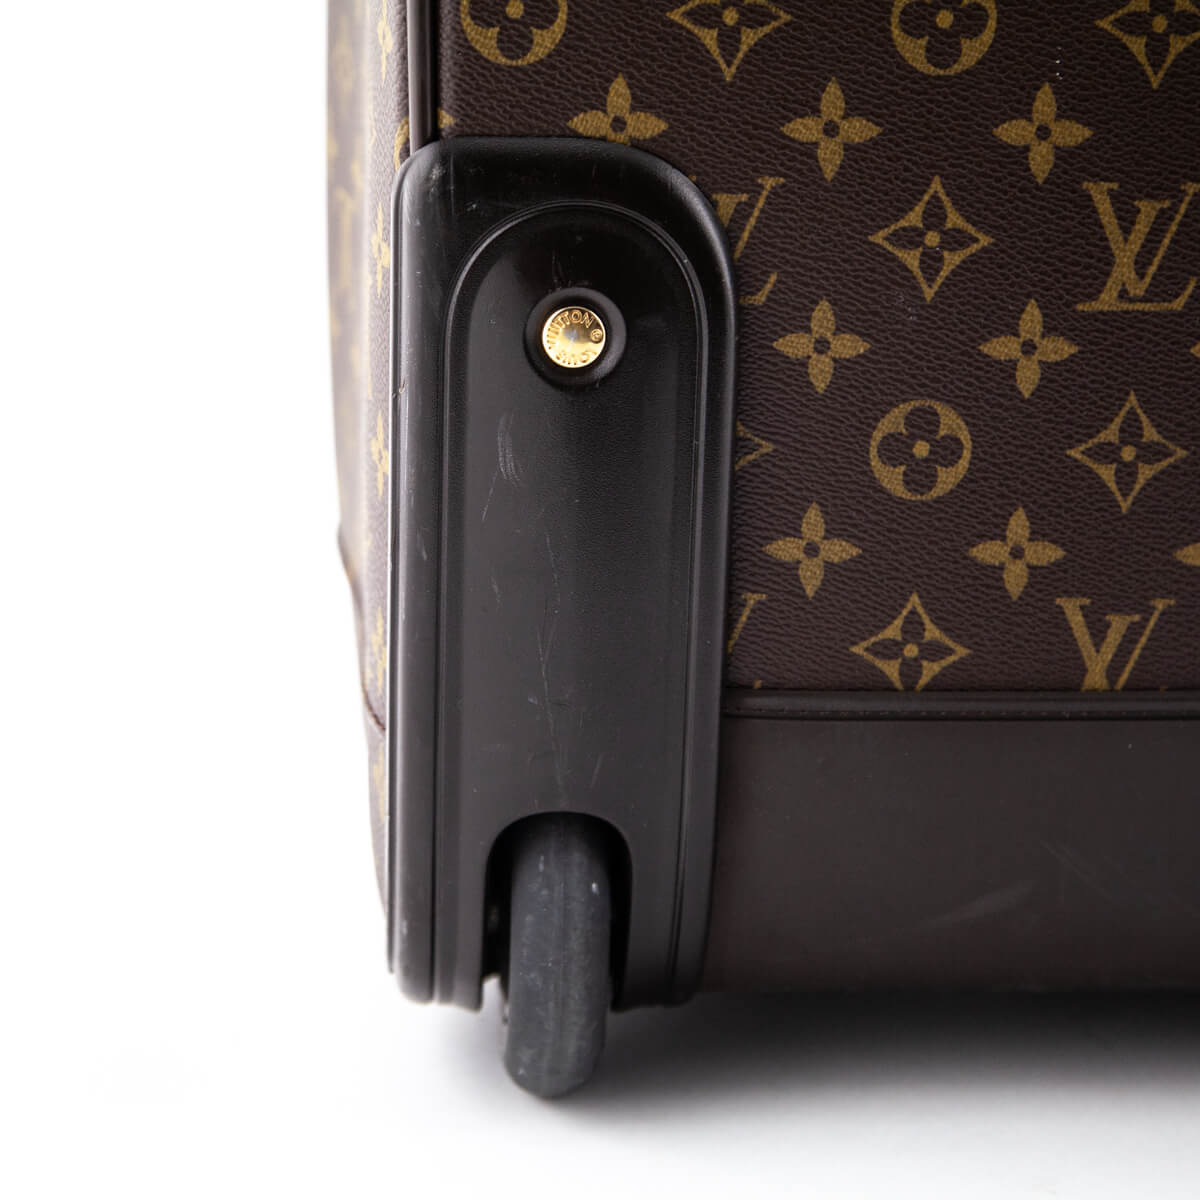 Up for your consideration: LOUIS VUITTON Monogram Pegase 45 available in  Excellent Used Condition. Please review photos carefully, as you…